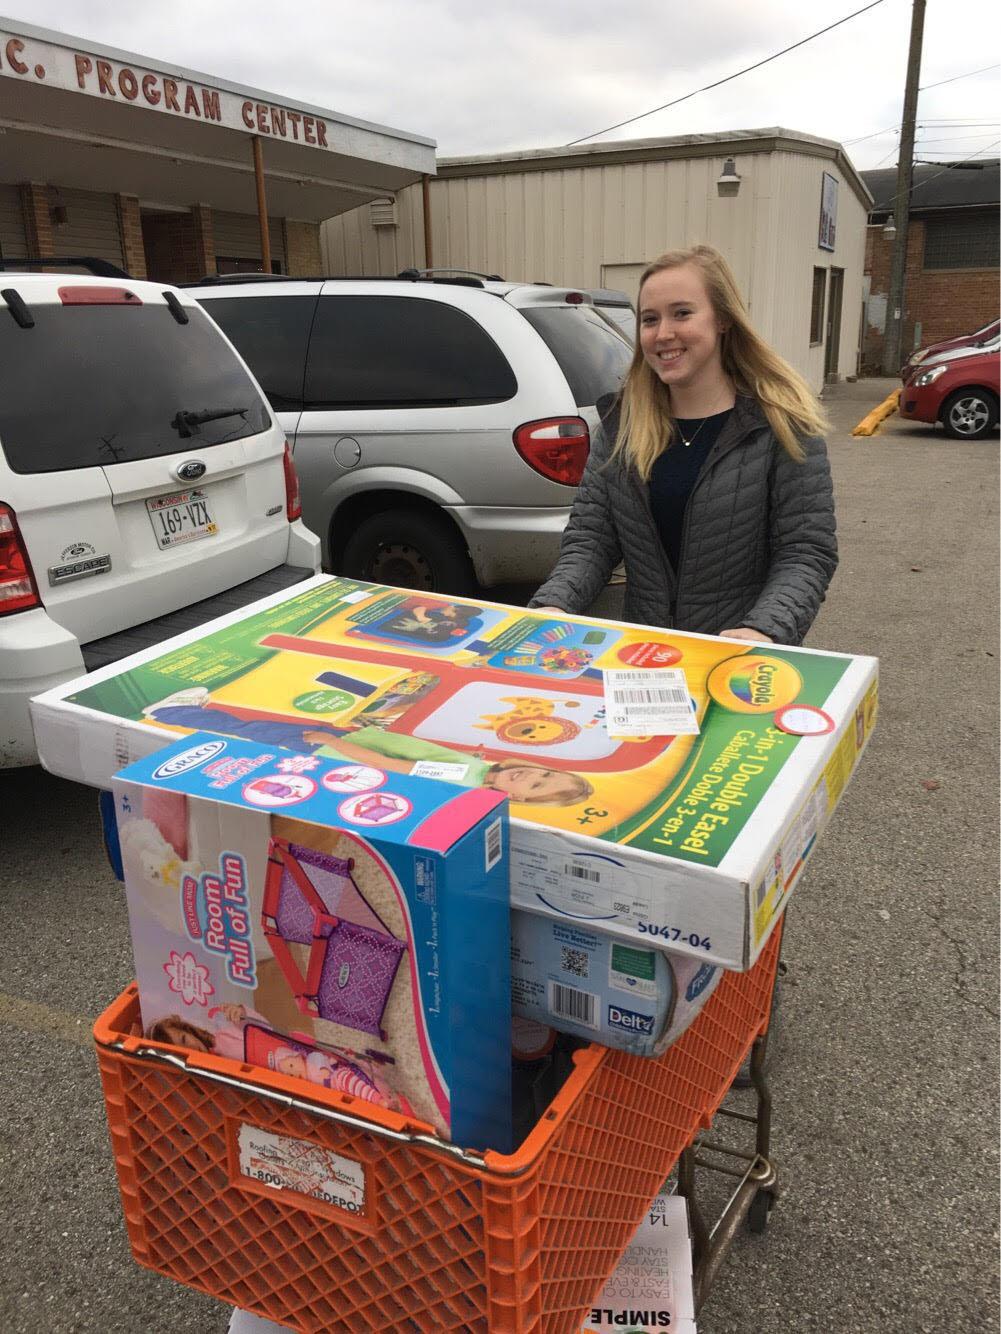 All presents will be distributed to the parents soon from Love Inc. Pictured is Key Club president Jaclyn delivering the Adopt-a-Family presents to Love Inc.